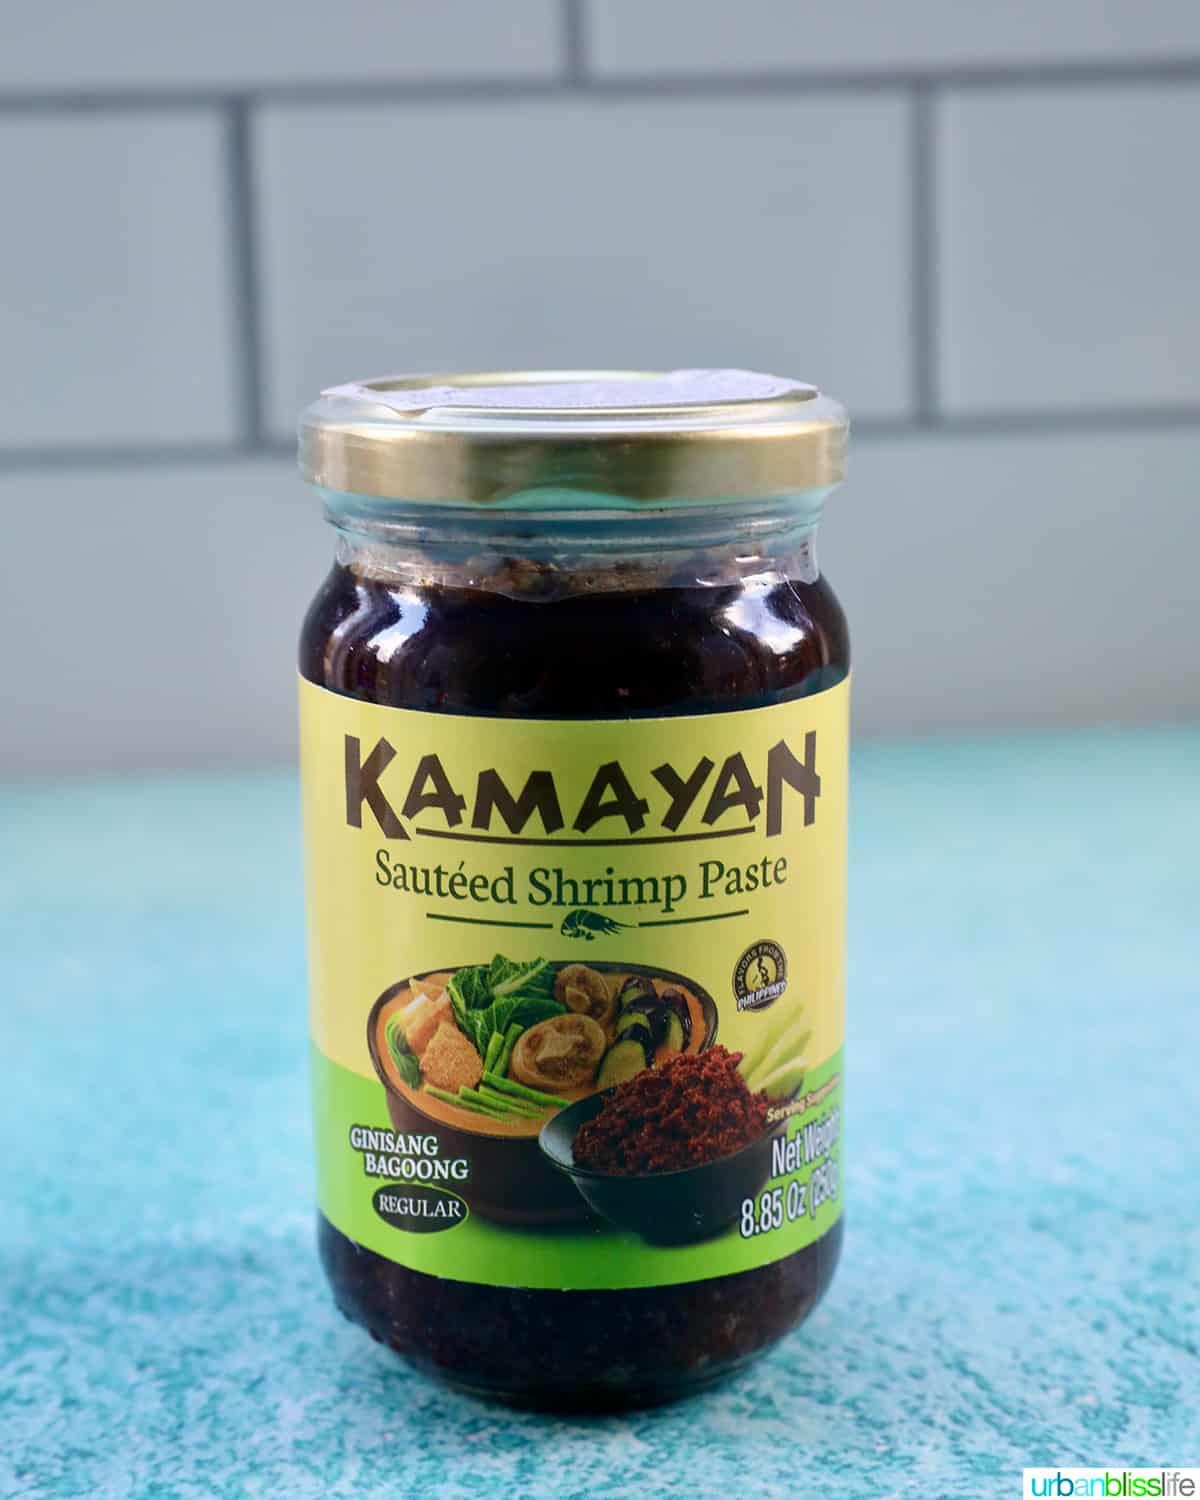 bottle of Kamayan shrimp paste (bagoong) on a blue table with white tile background.